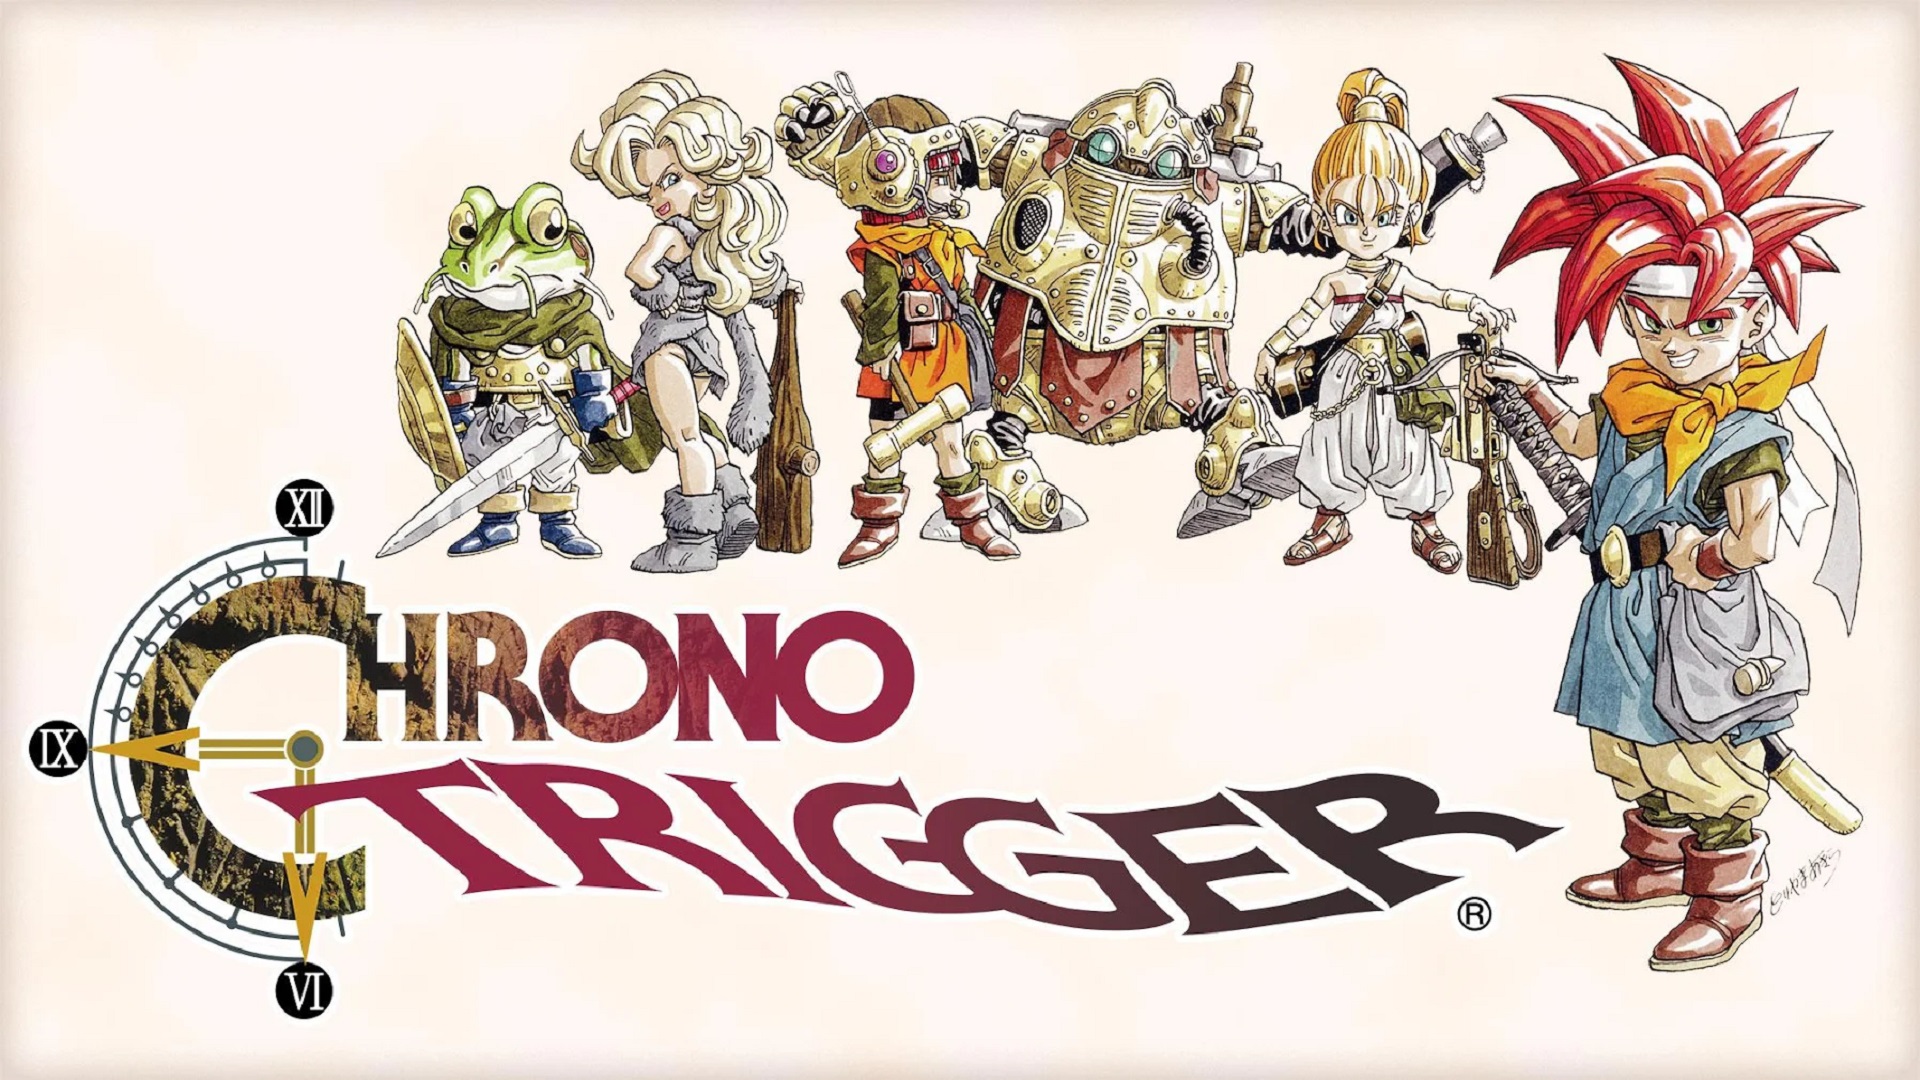 Best Android games: Chrono Trigger. Image shows a group of Chrono Trigger characters standing around the game logo.